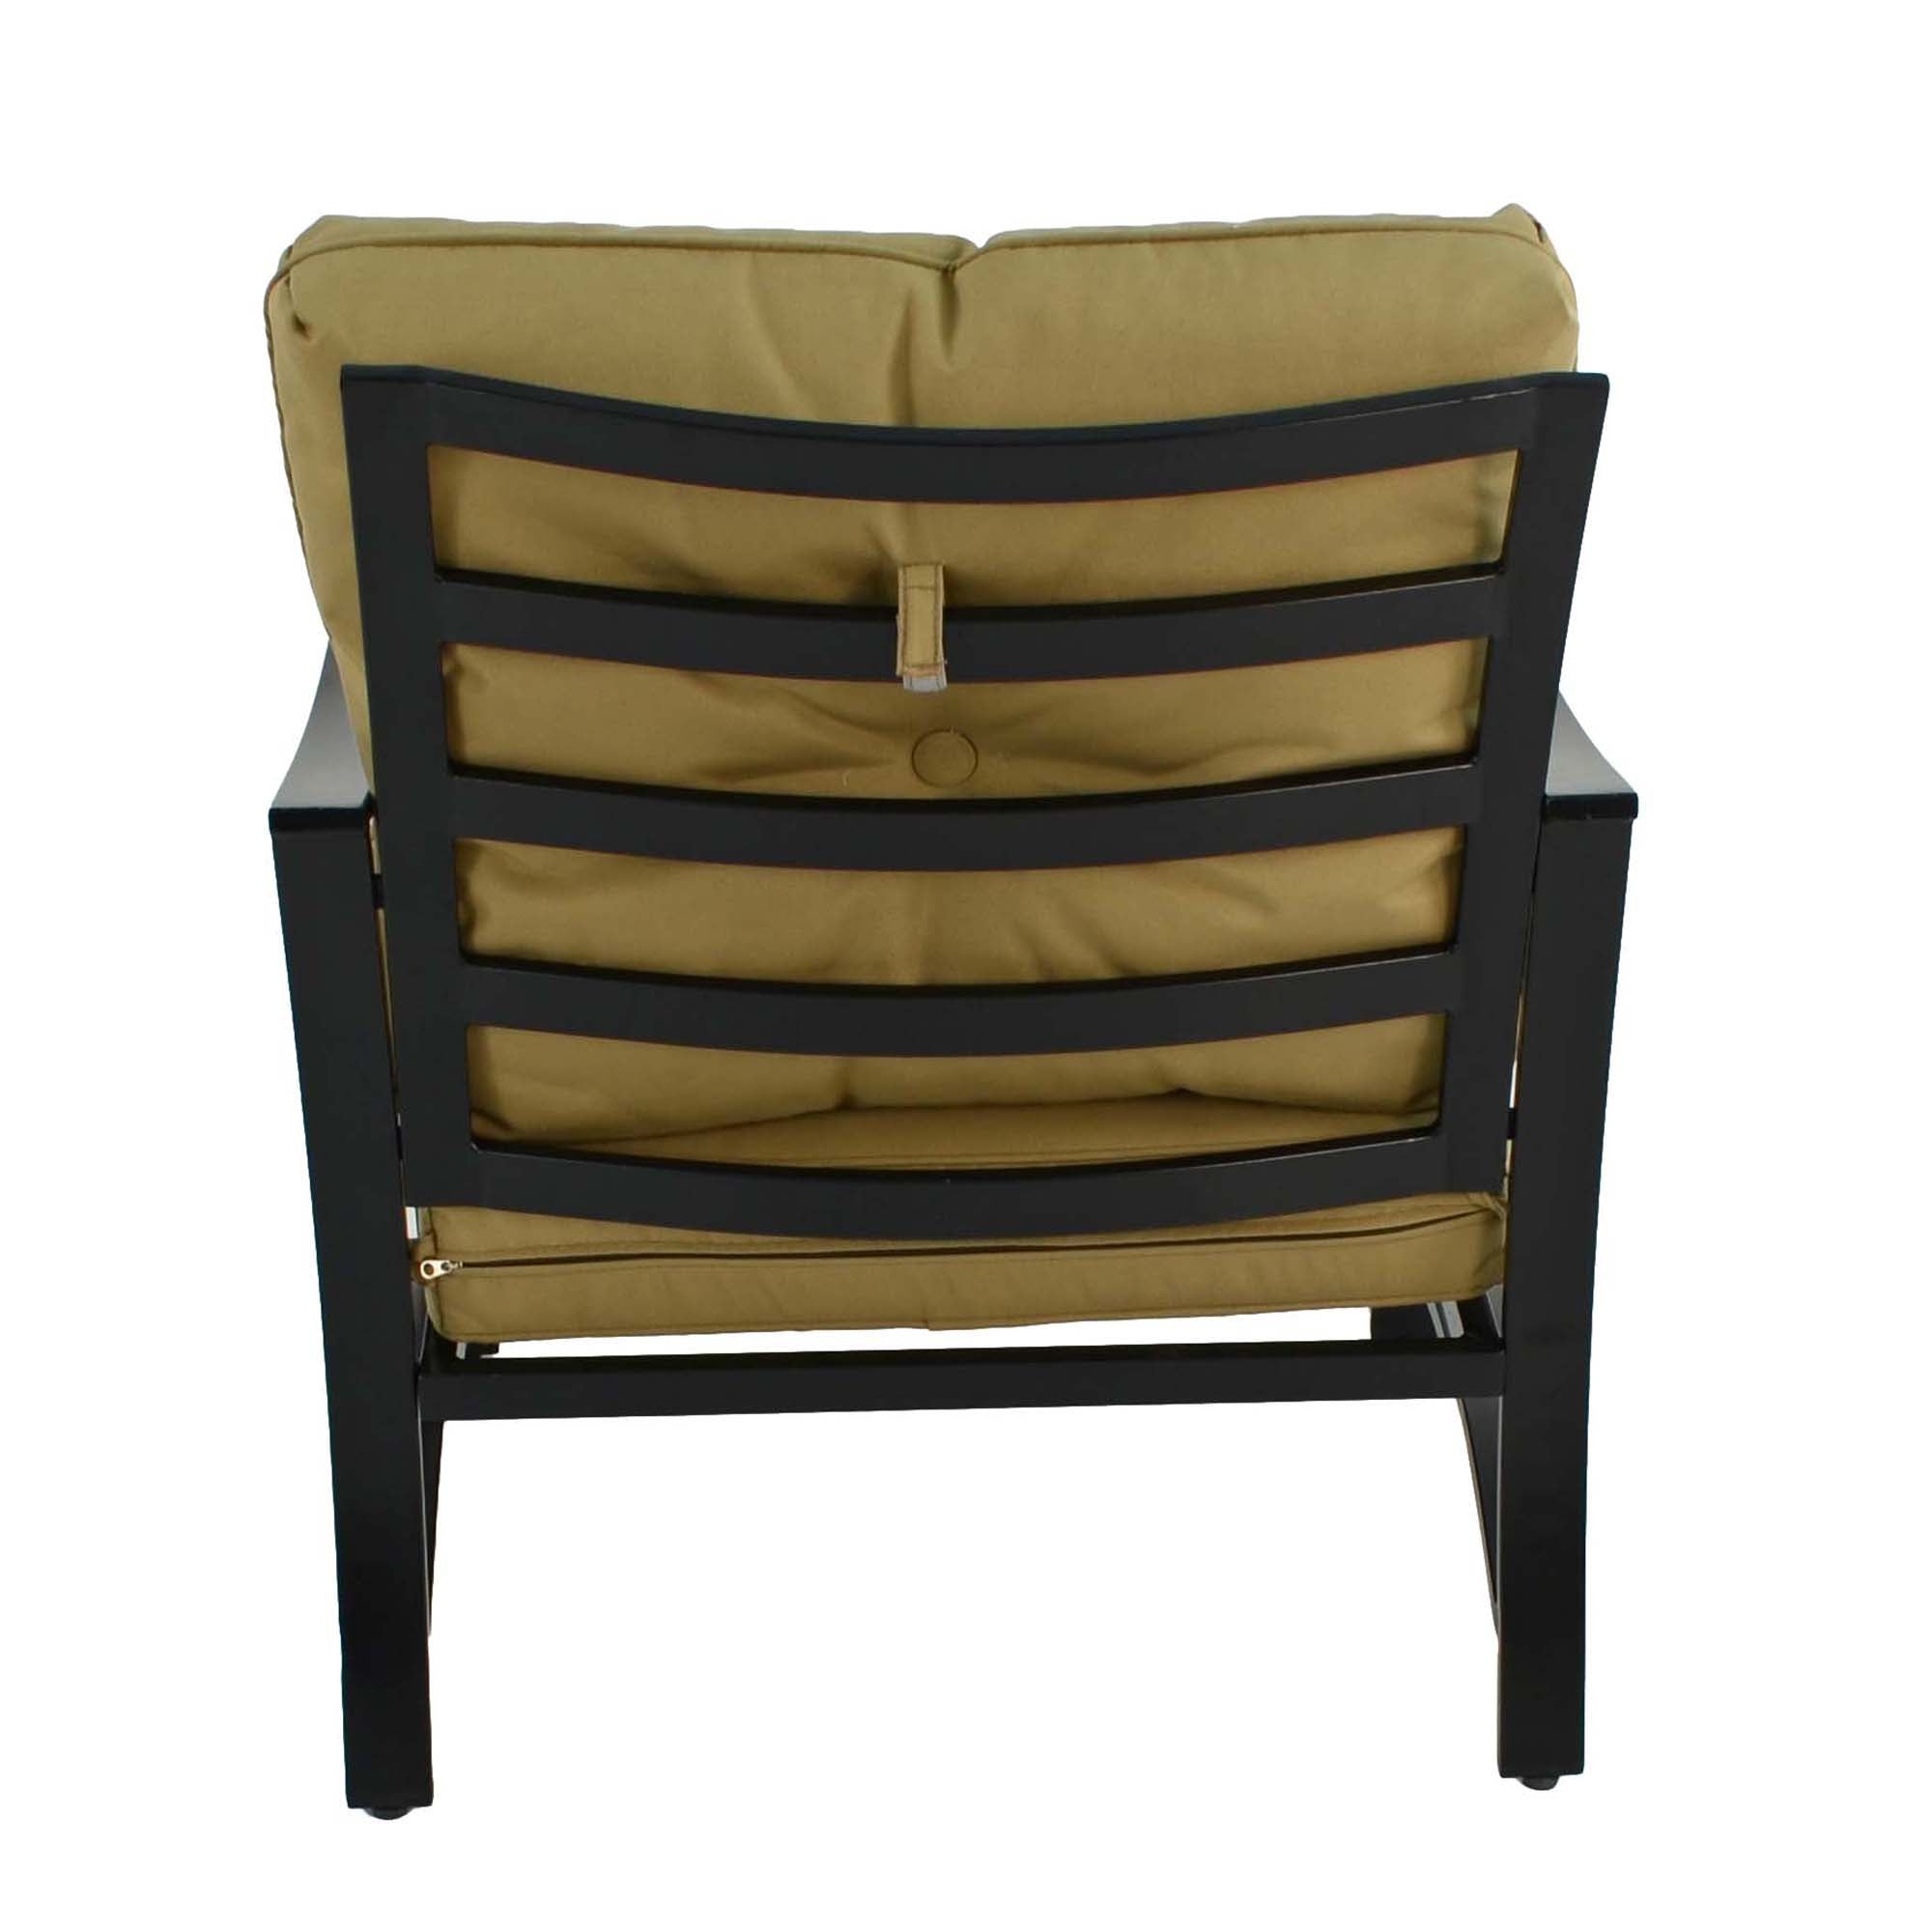 Byron Manor Windsor Garden Lounge Chair (Pack of 2) Chairs Byron Manor   